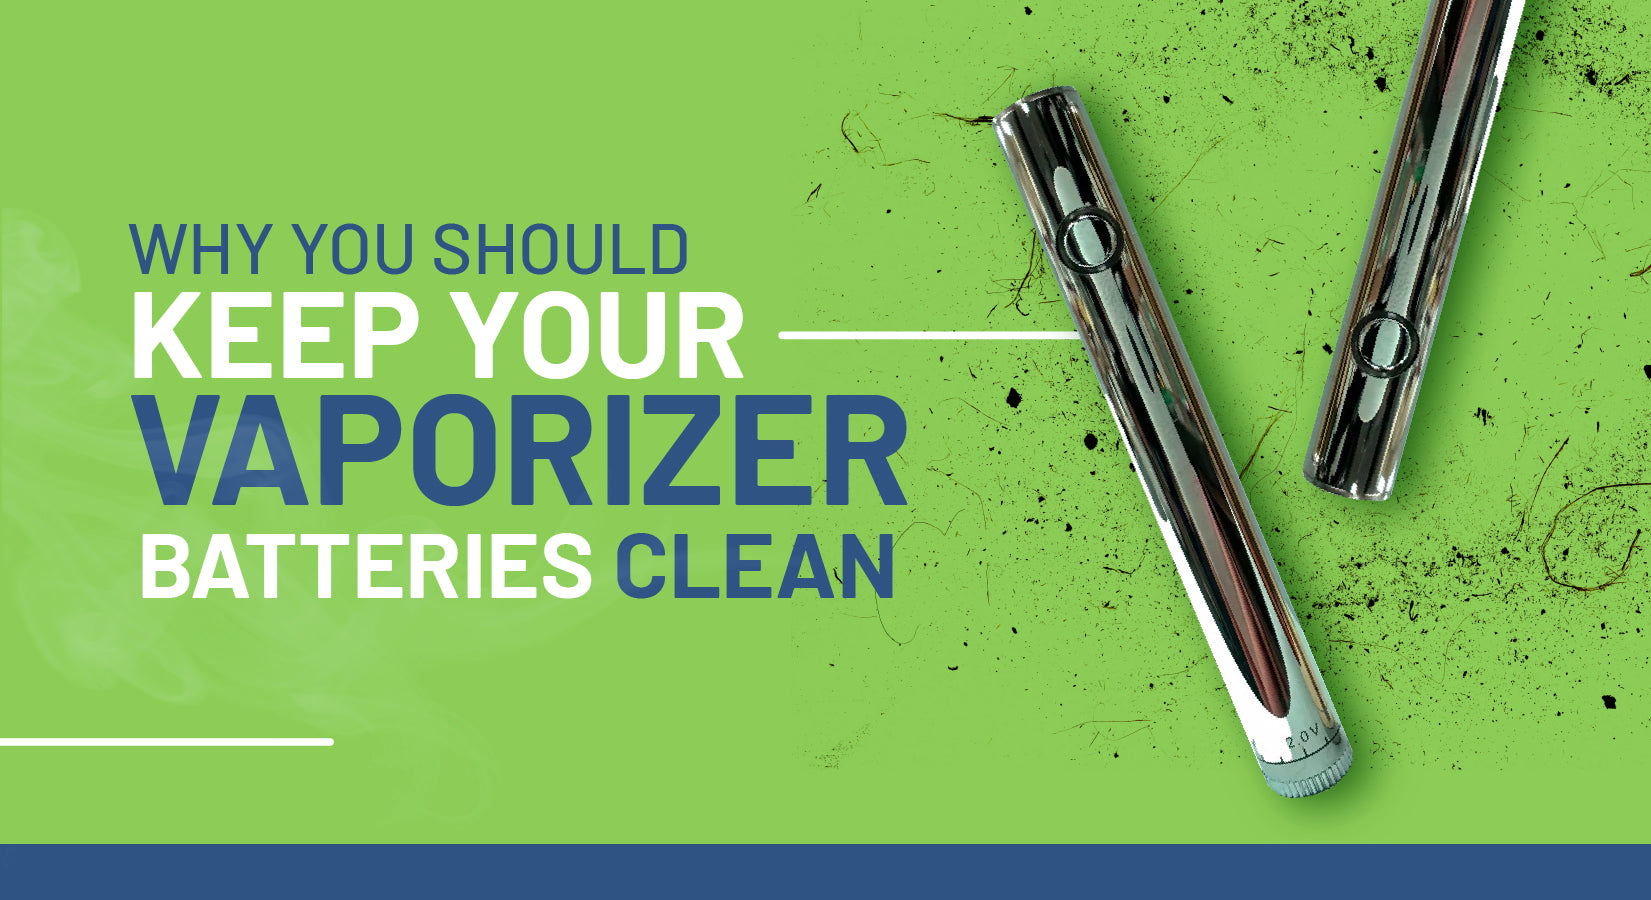 Why You Should Keep Your Vaporizer Batteries Clean